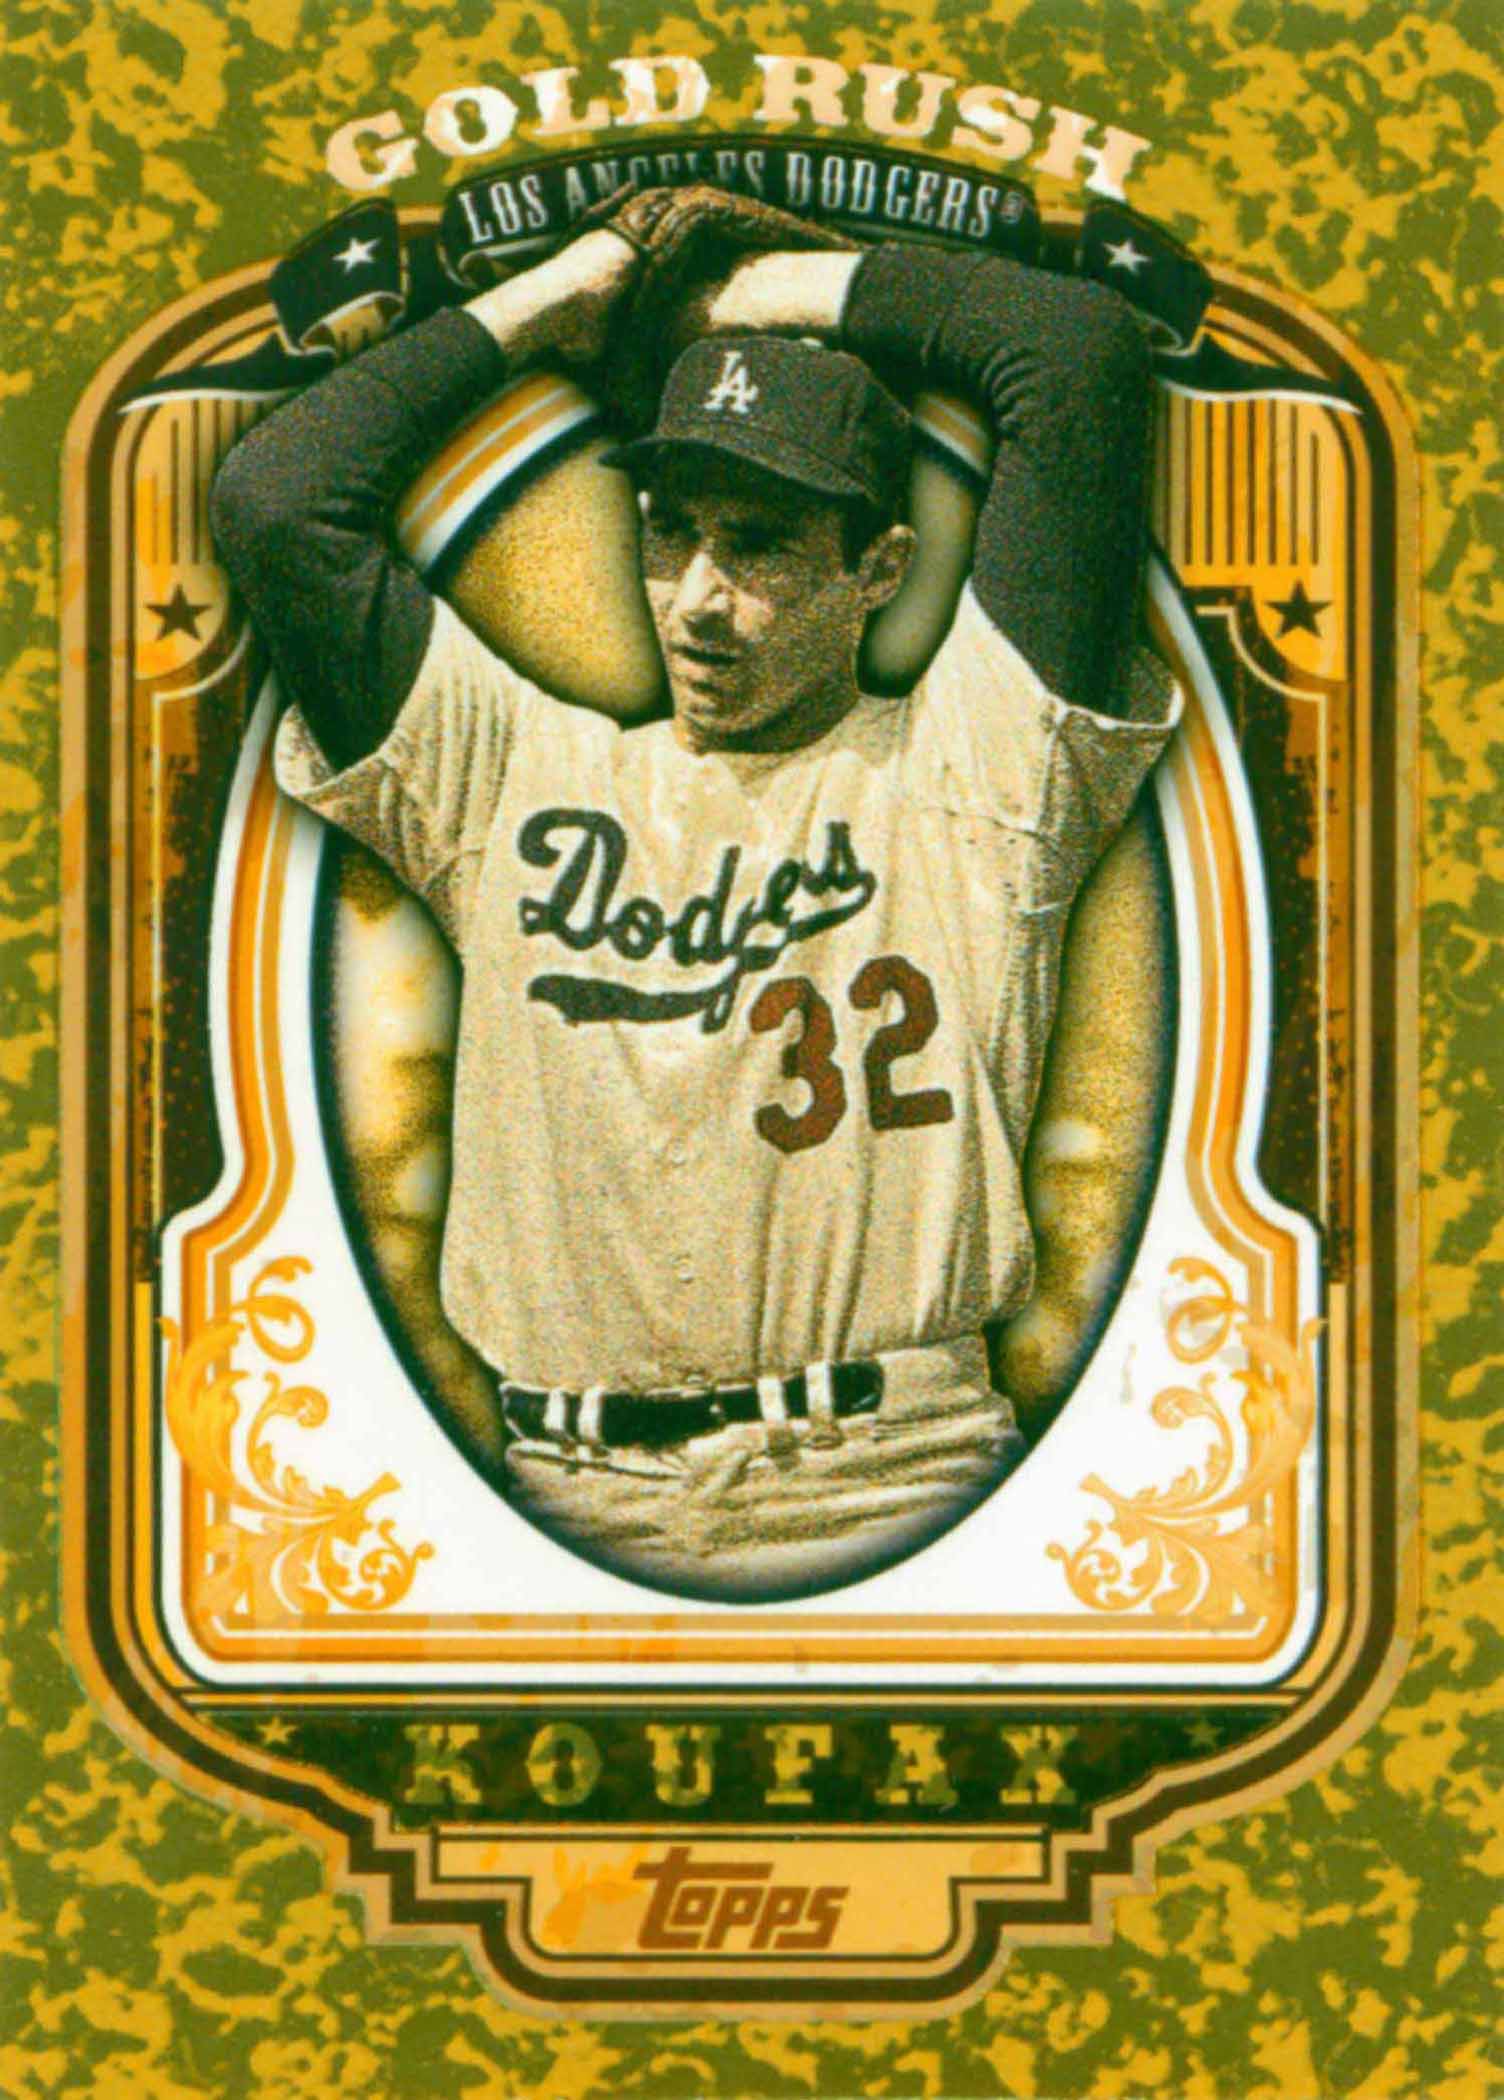 2012 Topps Gold Rush Wrapper Redemption